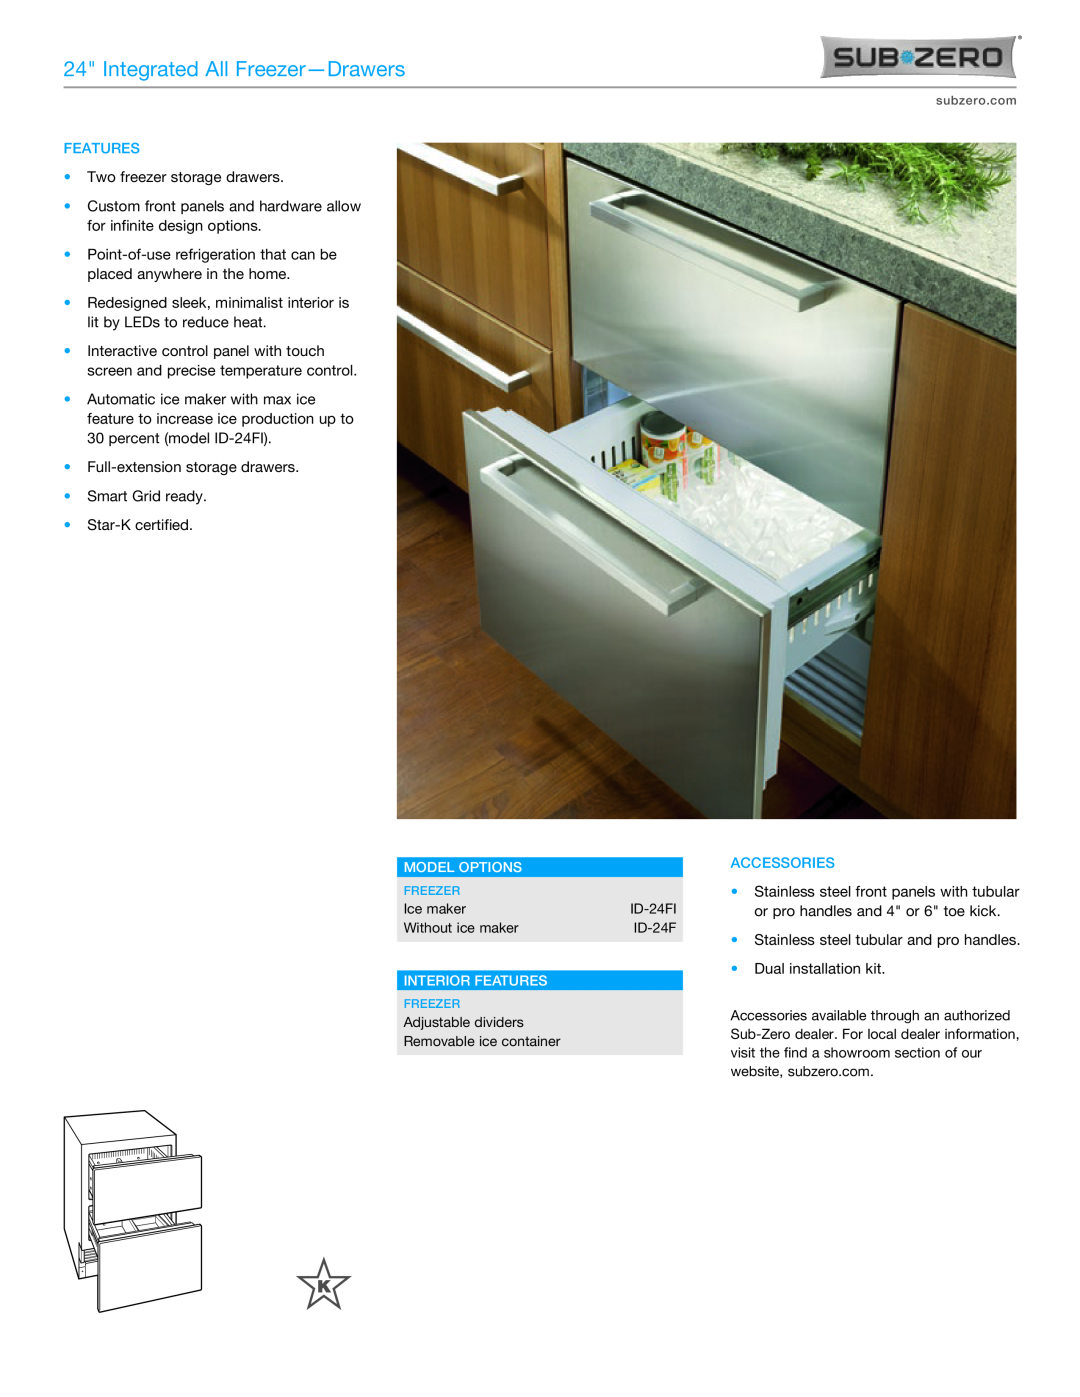 Sub-Zero ID-24FI manual Integrated All Freezer-Drawers, Model Options, Interior Features, Accessories 